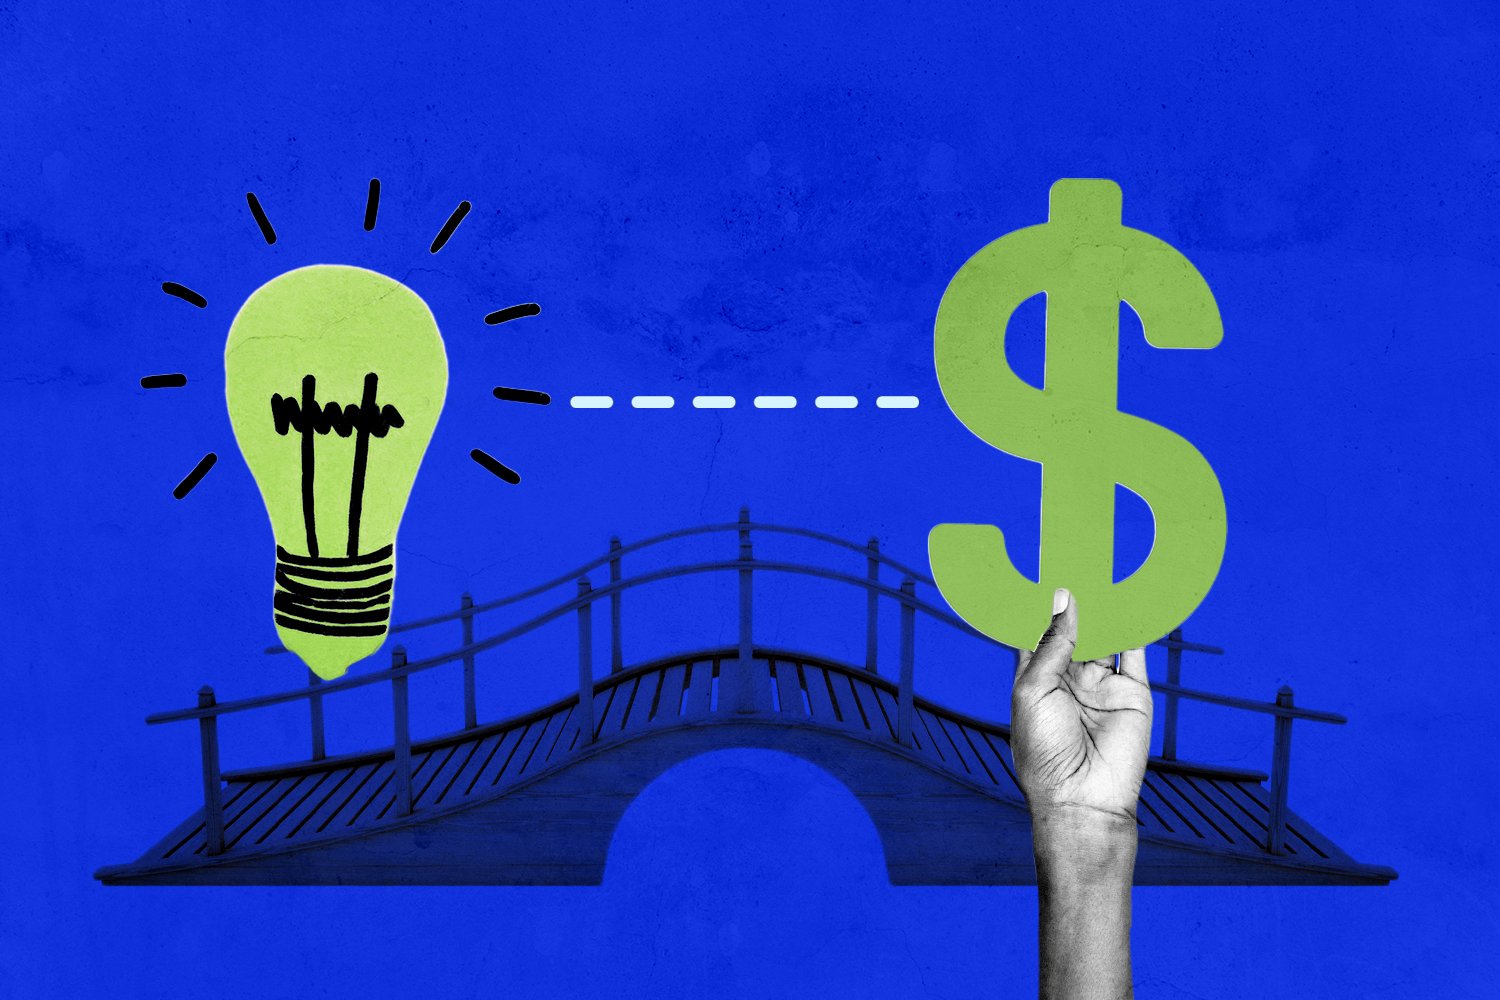 An illustration that shows a bridge with a lightning bulb on one side and a dollar sign on the other.